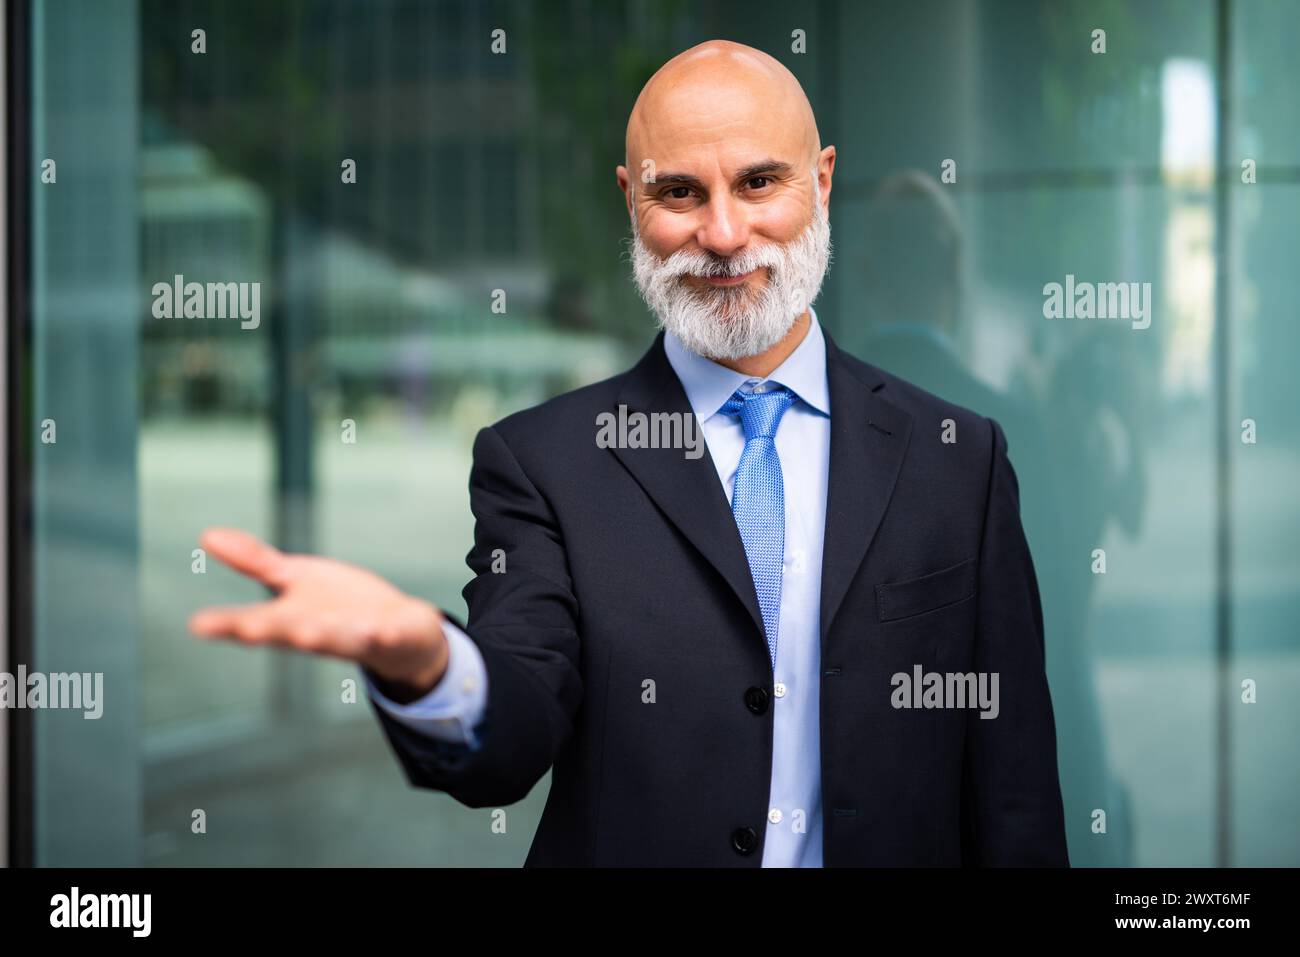 Mature bald stylish business man portrait with a white beard outdoor showing an open hand Stock Photo